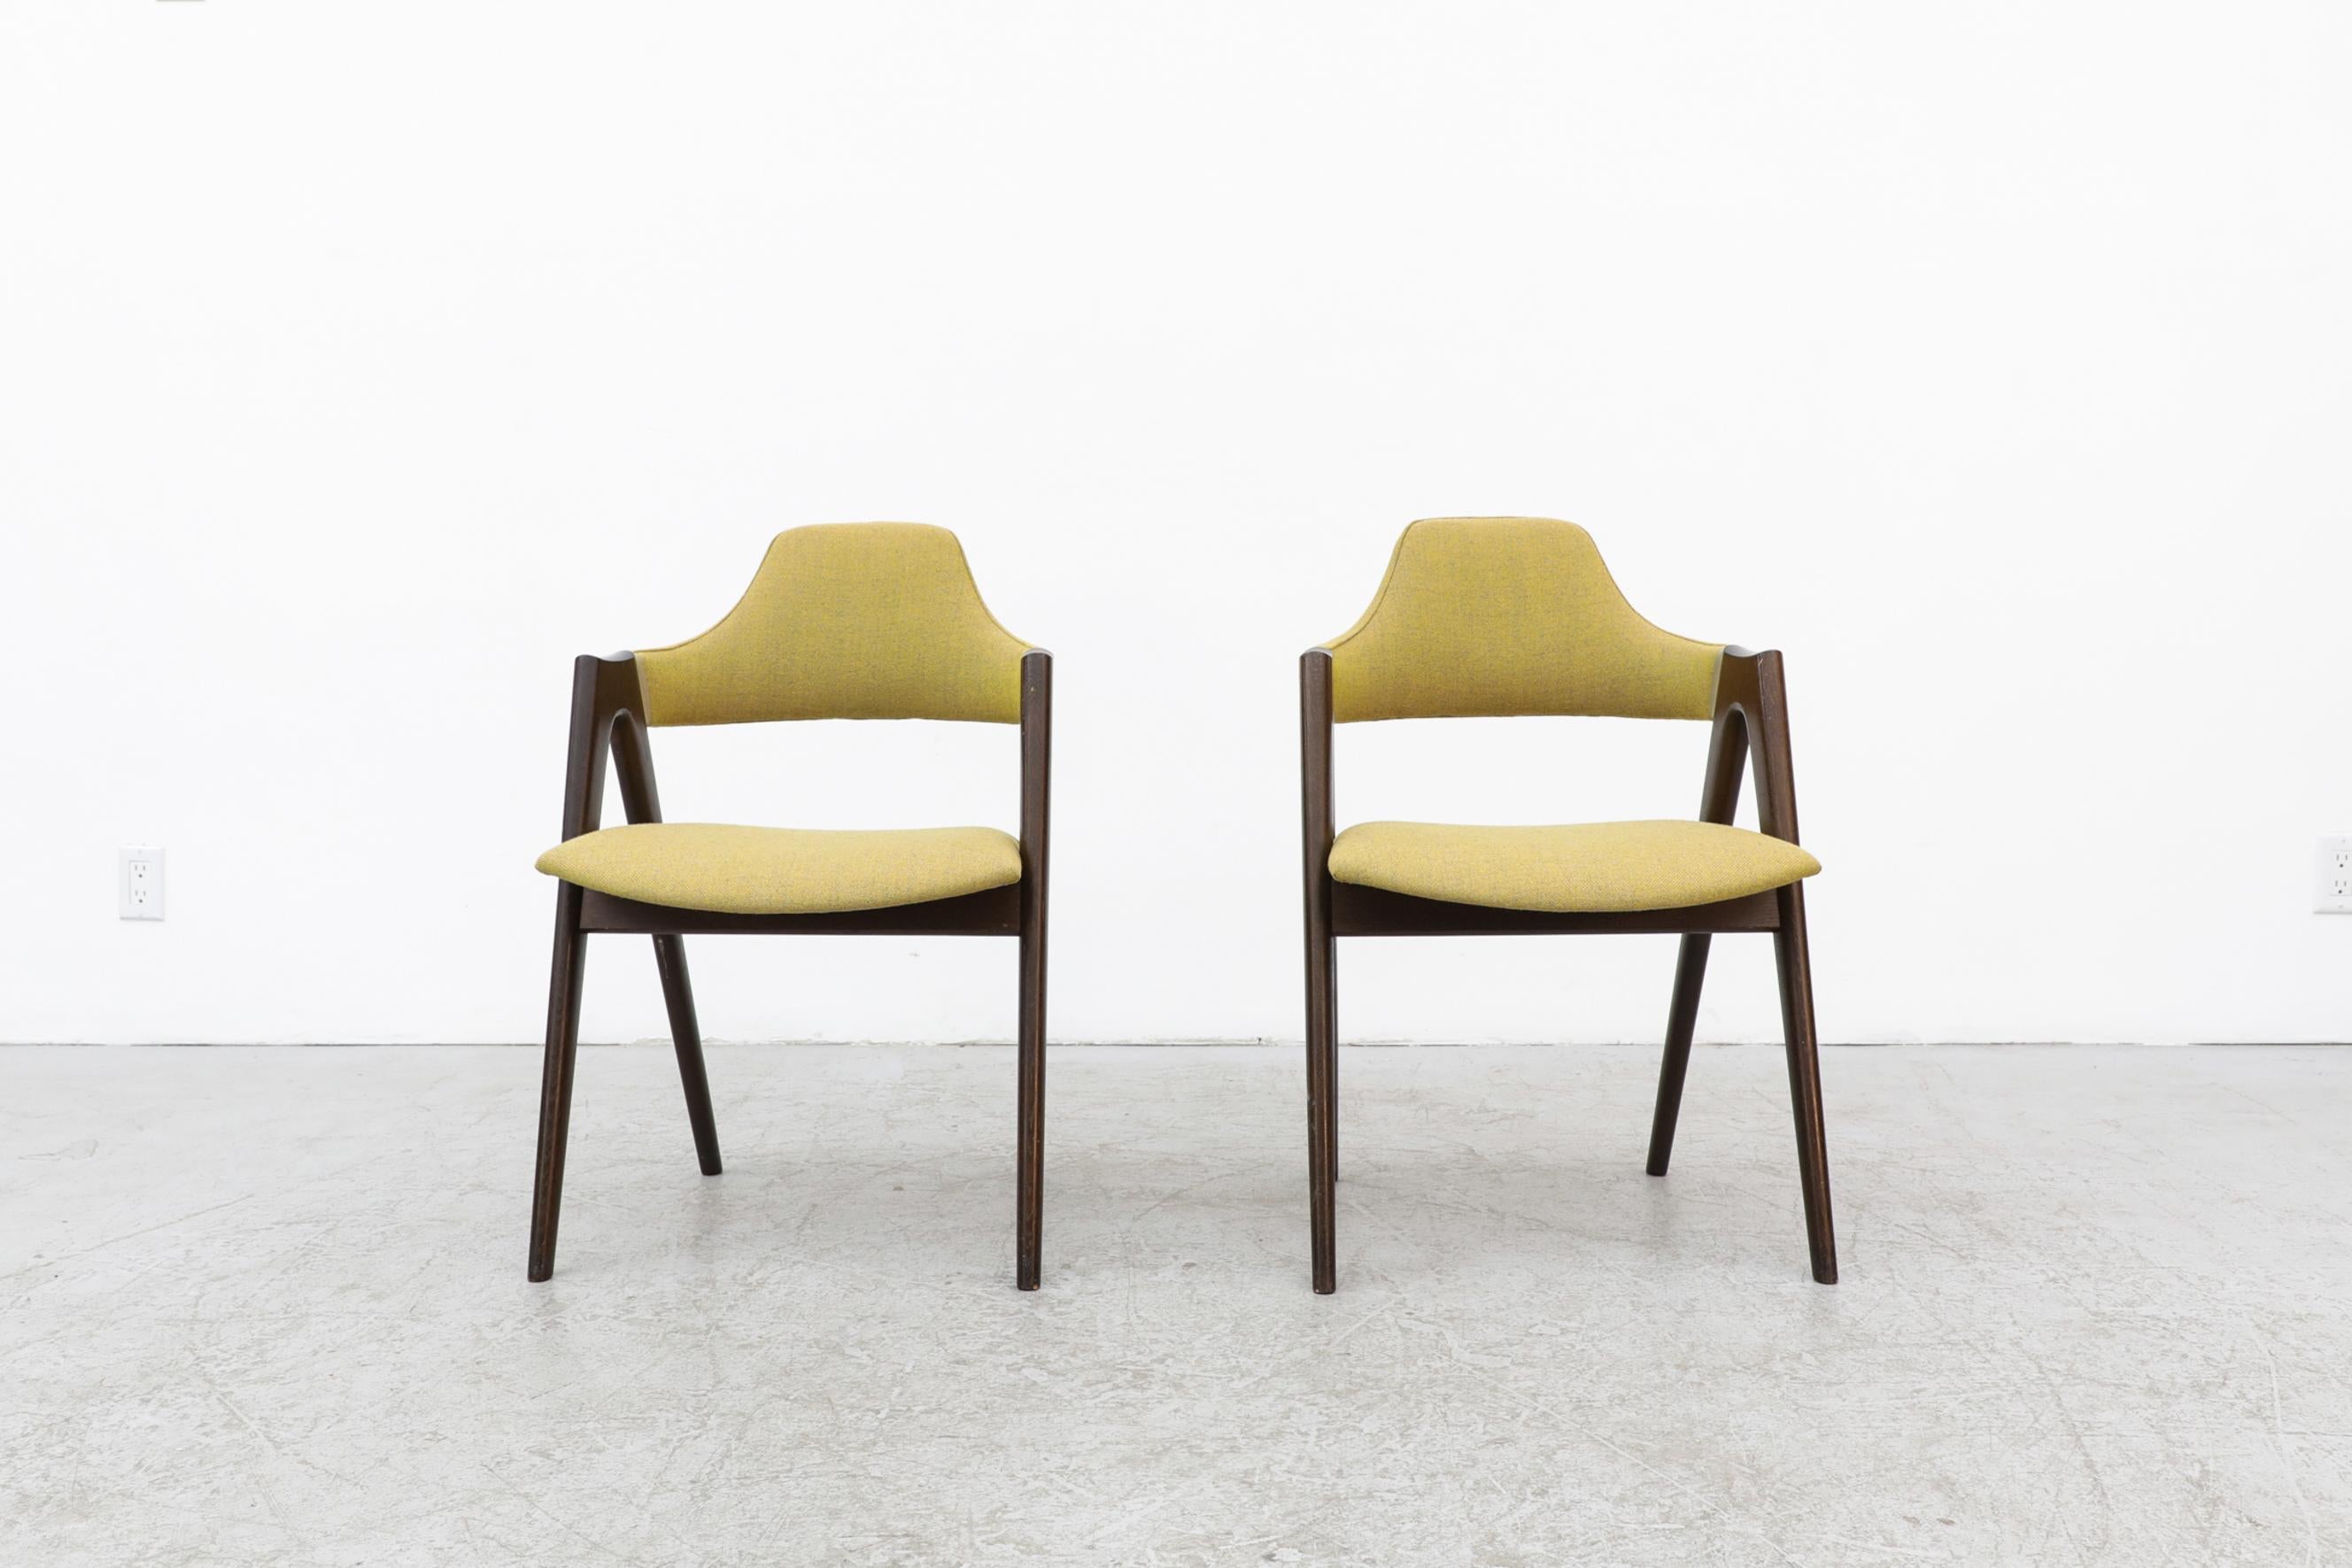 Pair of Kai Kristiansen Compass chairs with newer chartreuse upholstery. The frames are in original condition with signs of wear including some scuffs and scratching to the frame. Wear is consistent with their age and use. Other sets of Compass